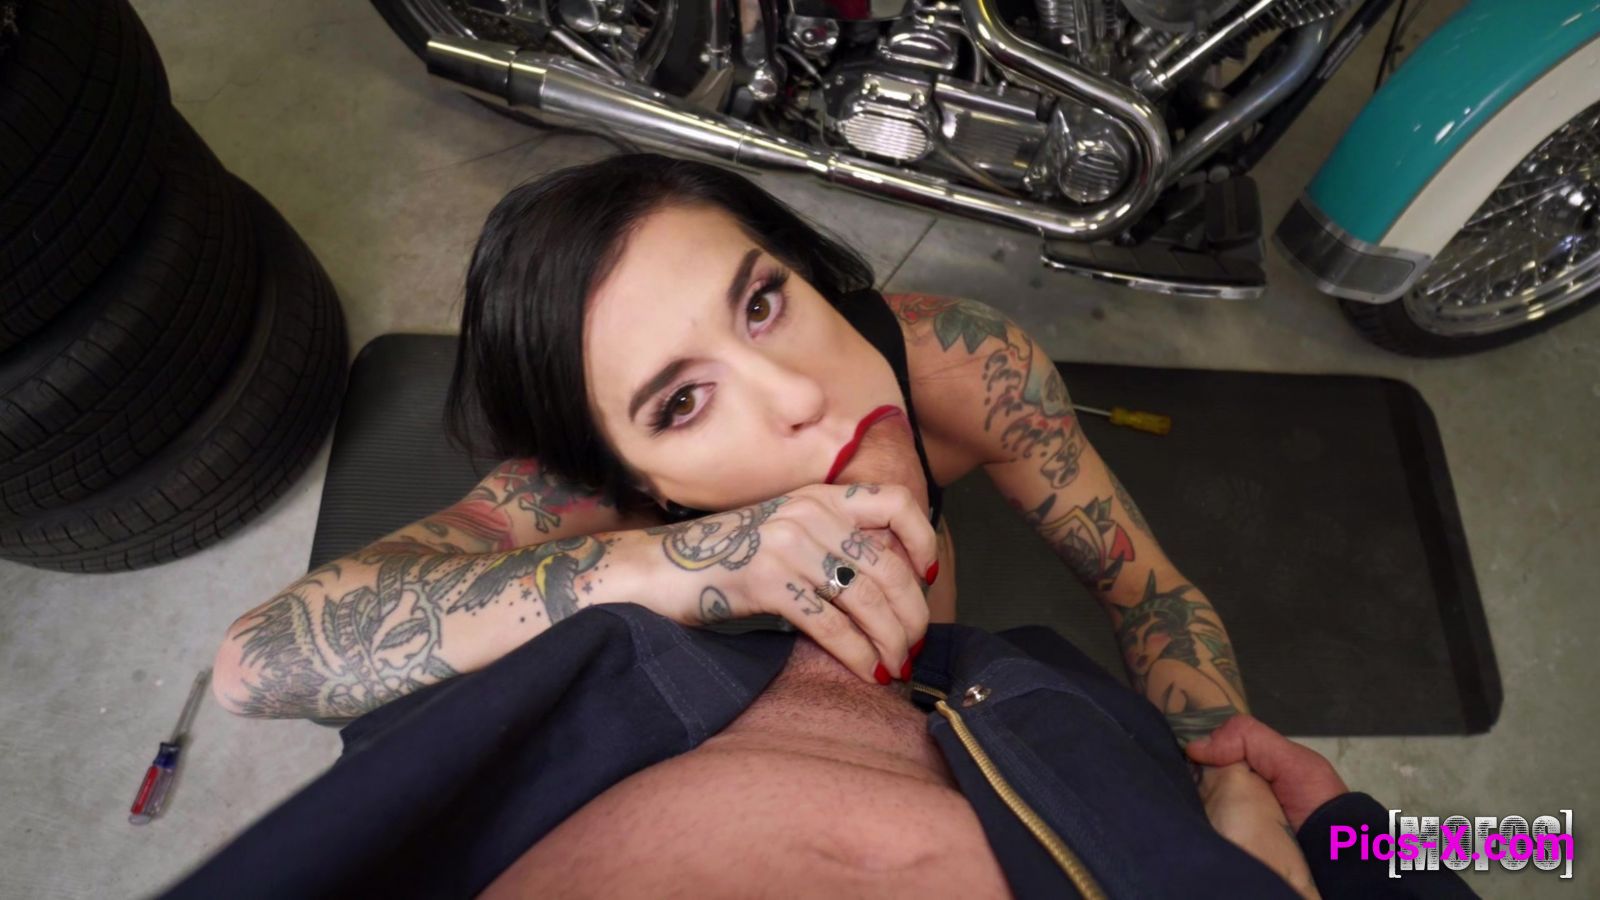 Squirting Biker Babe Fucks The Mechanic - I Know That Girl - Image 9